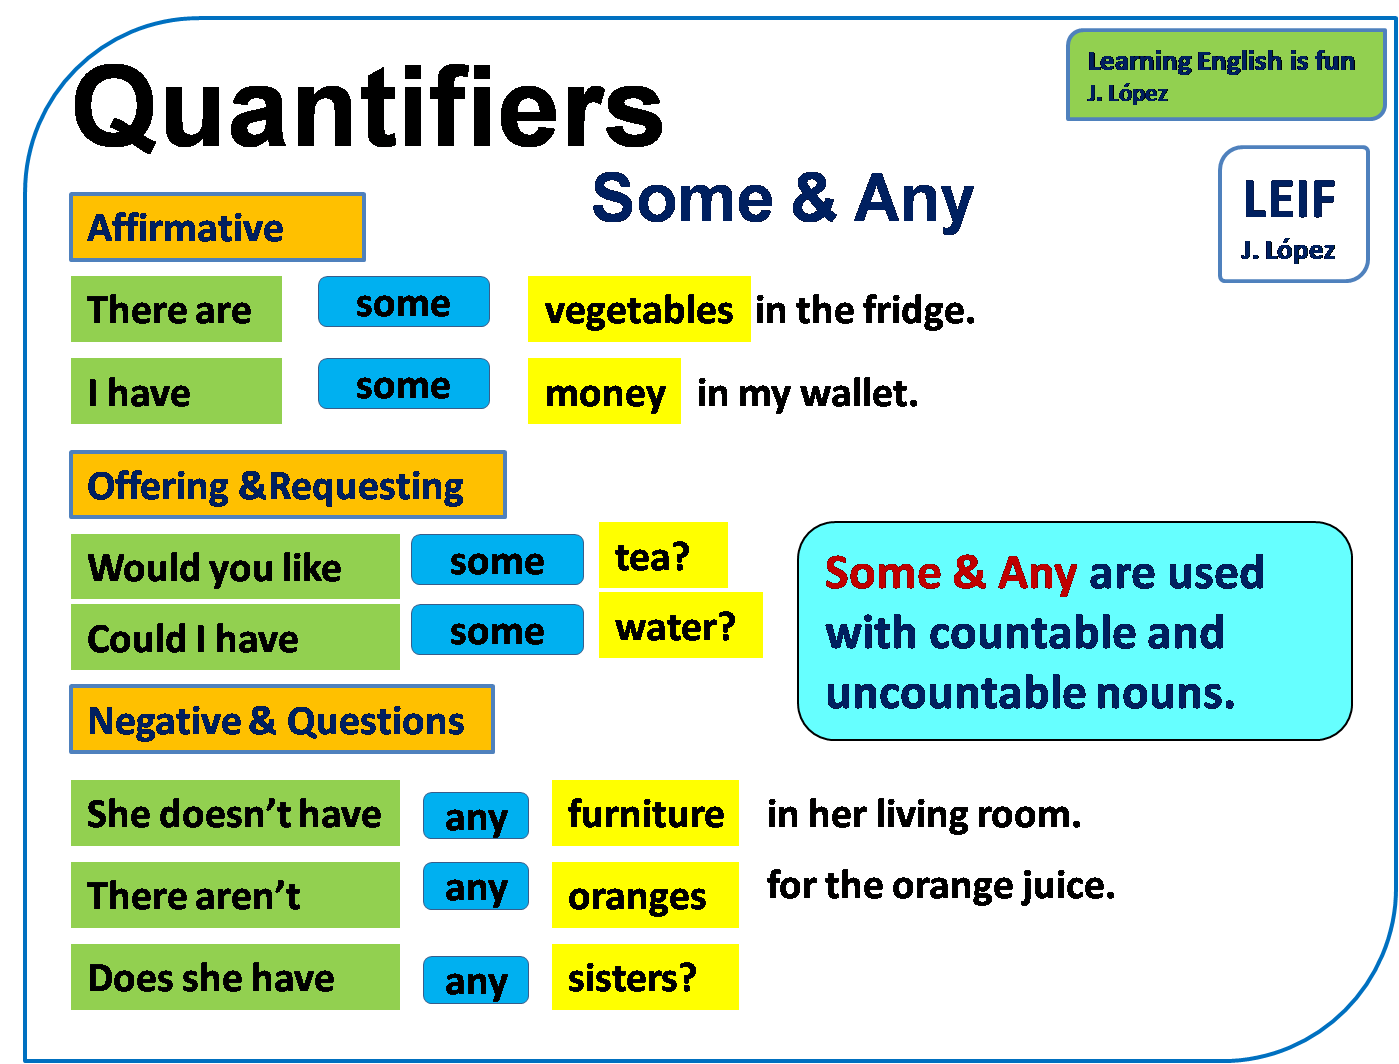 Some of the most common. Determiners and quantifiers в английском. Quantifiers грамматика. Quantifiers в английском языке. Countable uncountable в английском языке.